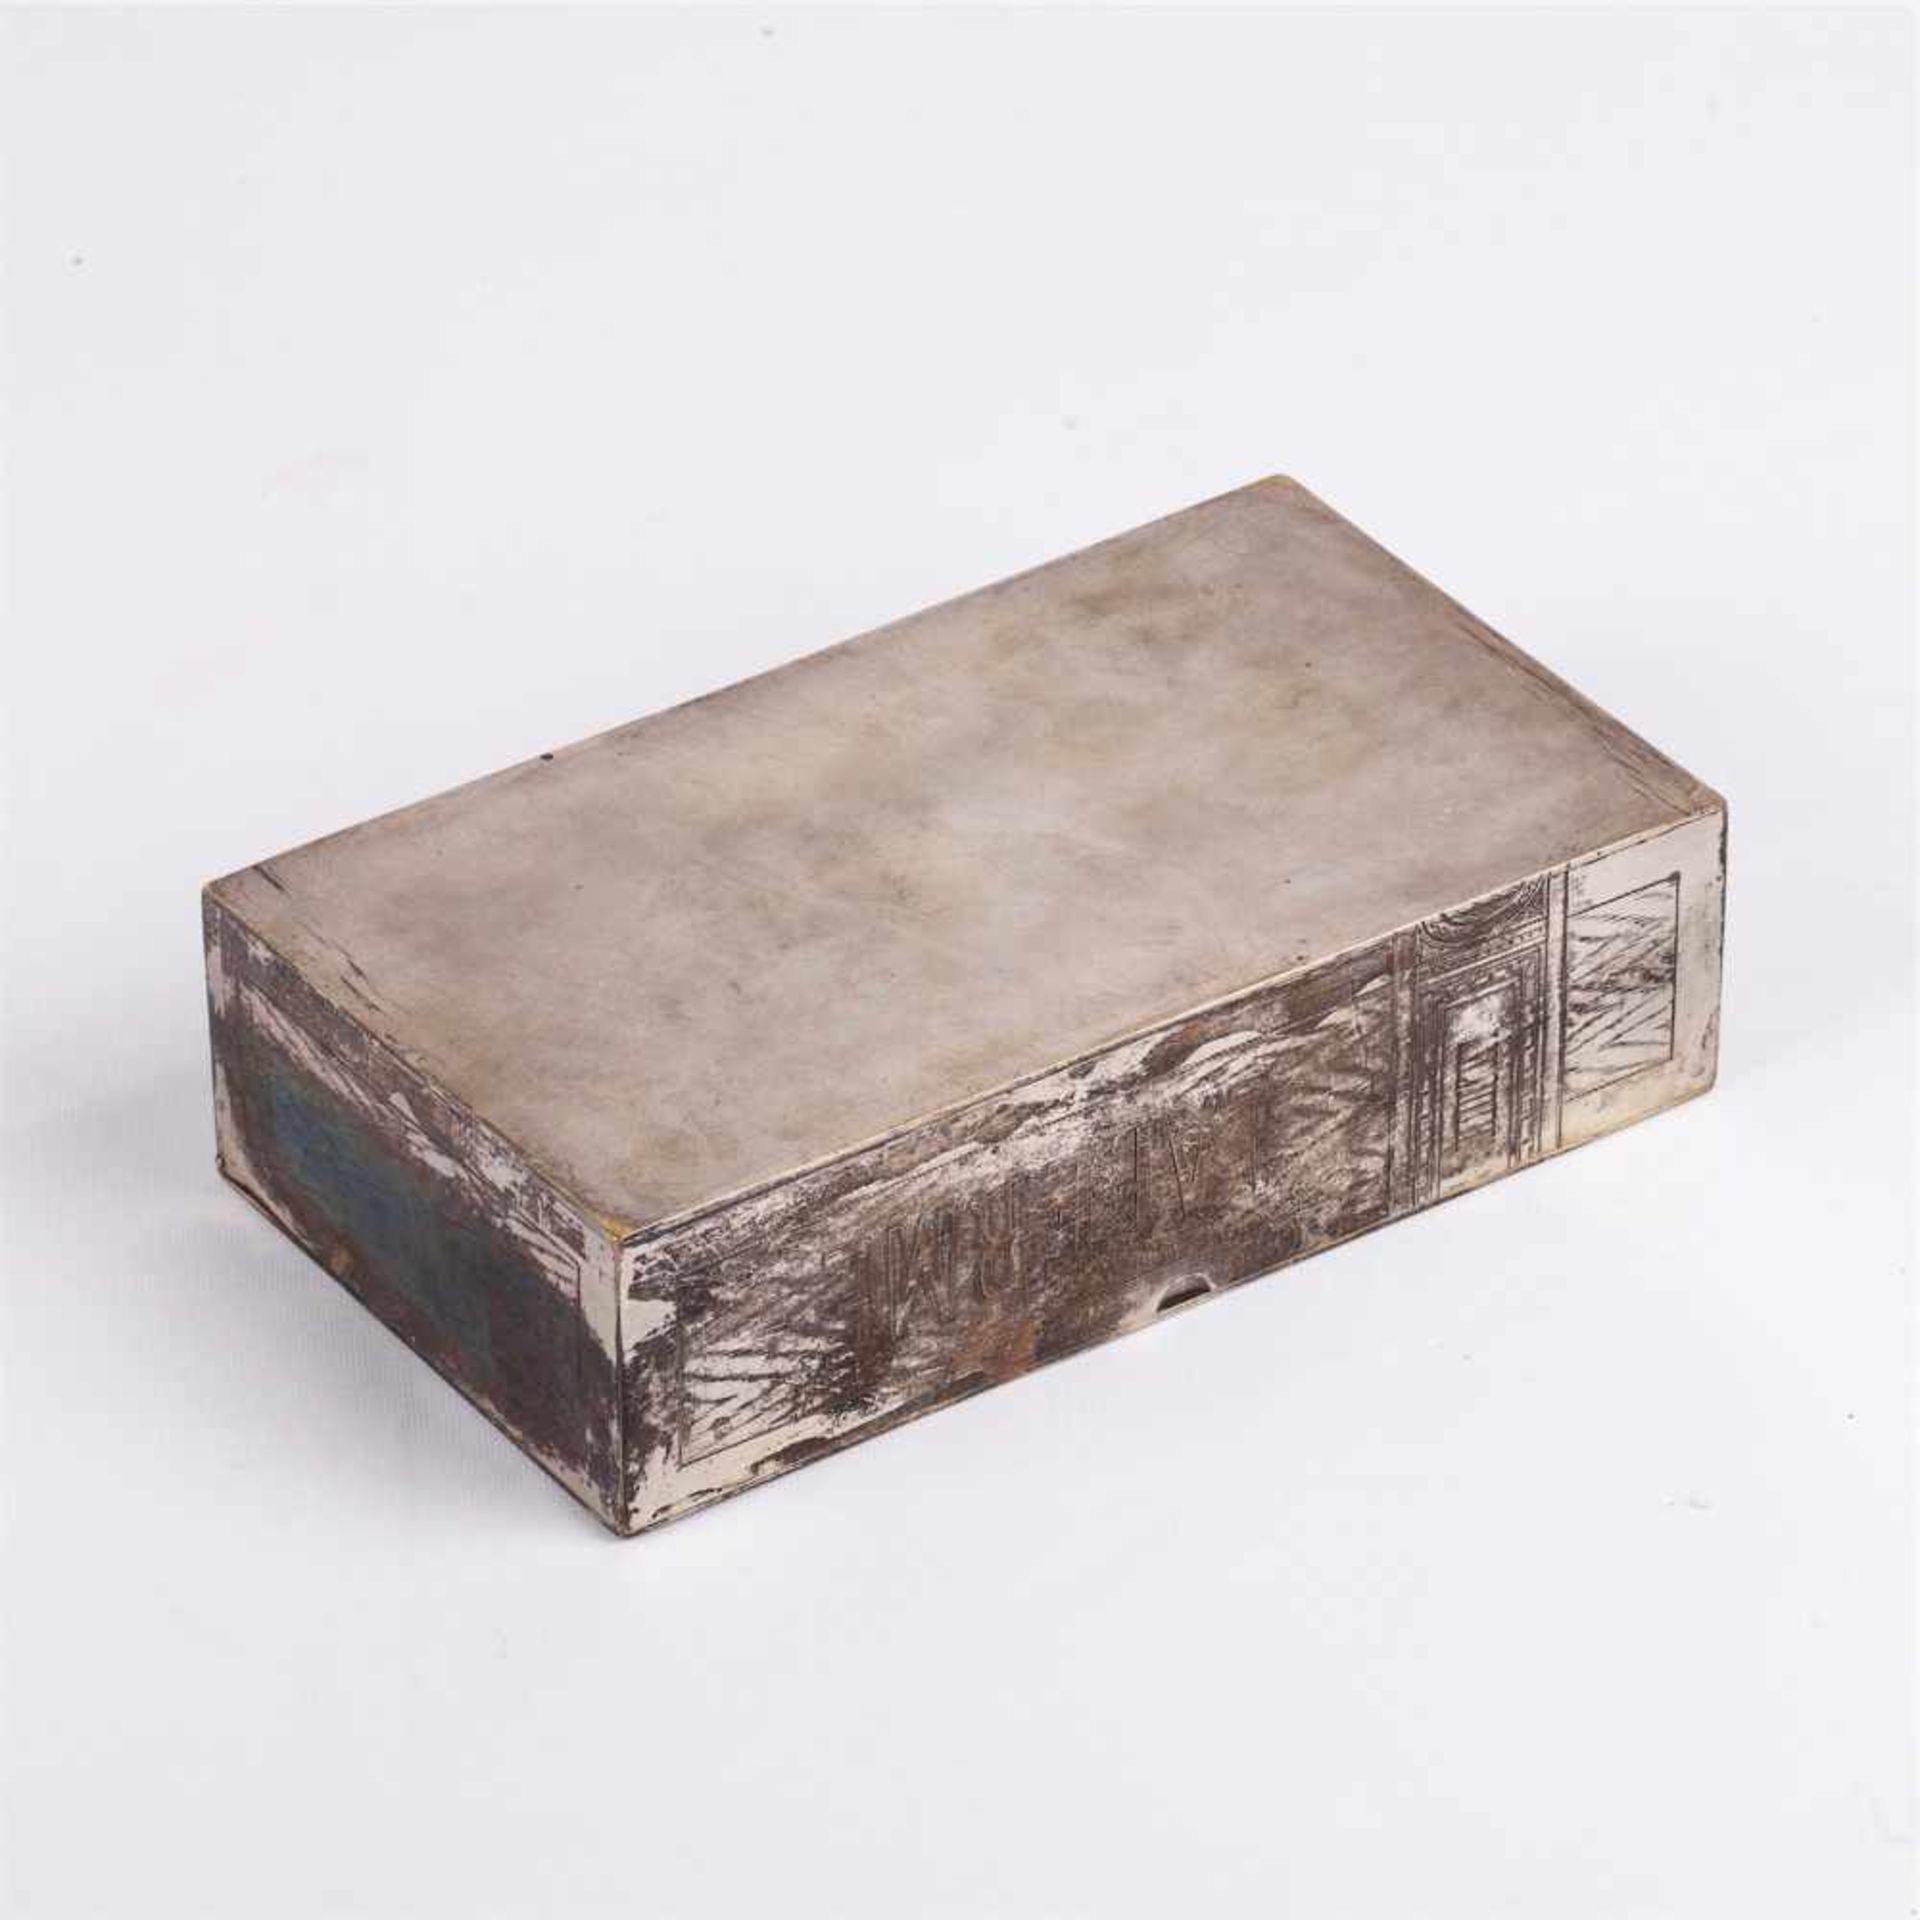 A Russian silver plated and gilded cigar boxA Russian silver plated and gilded brass cigar box - Image 3 of 4